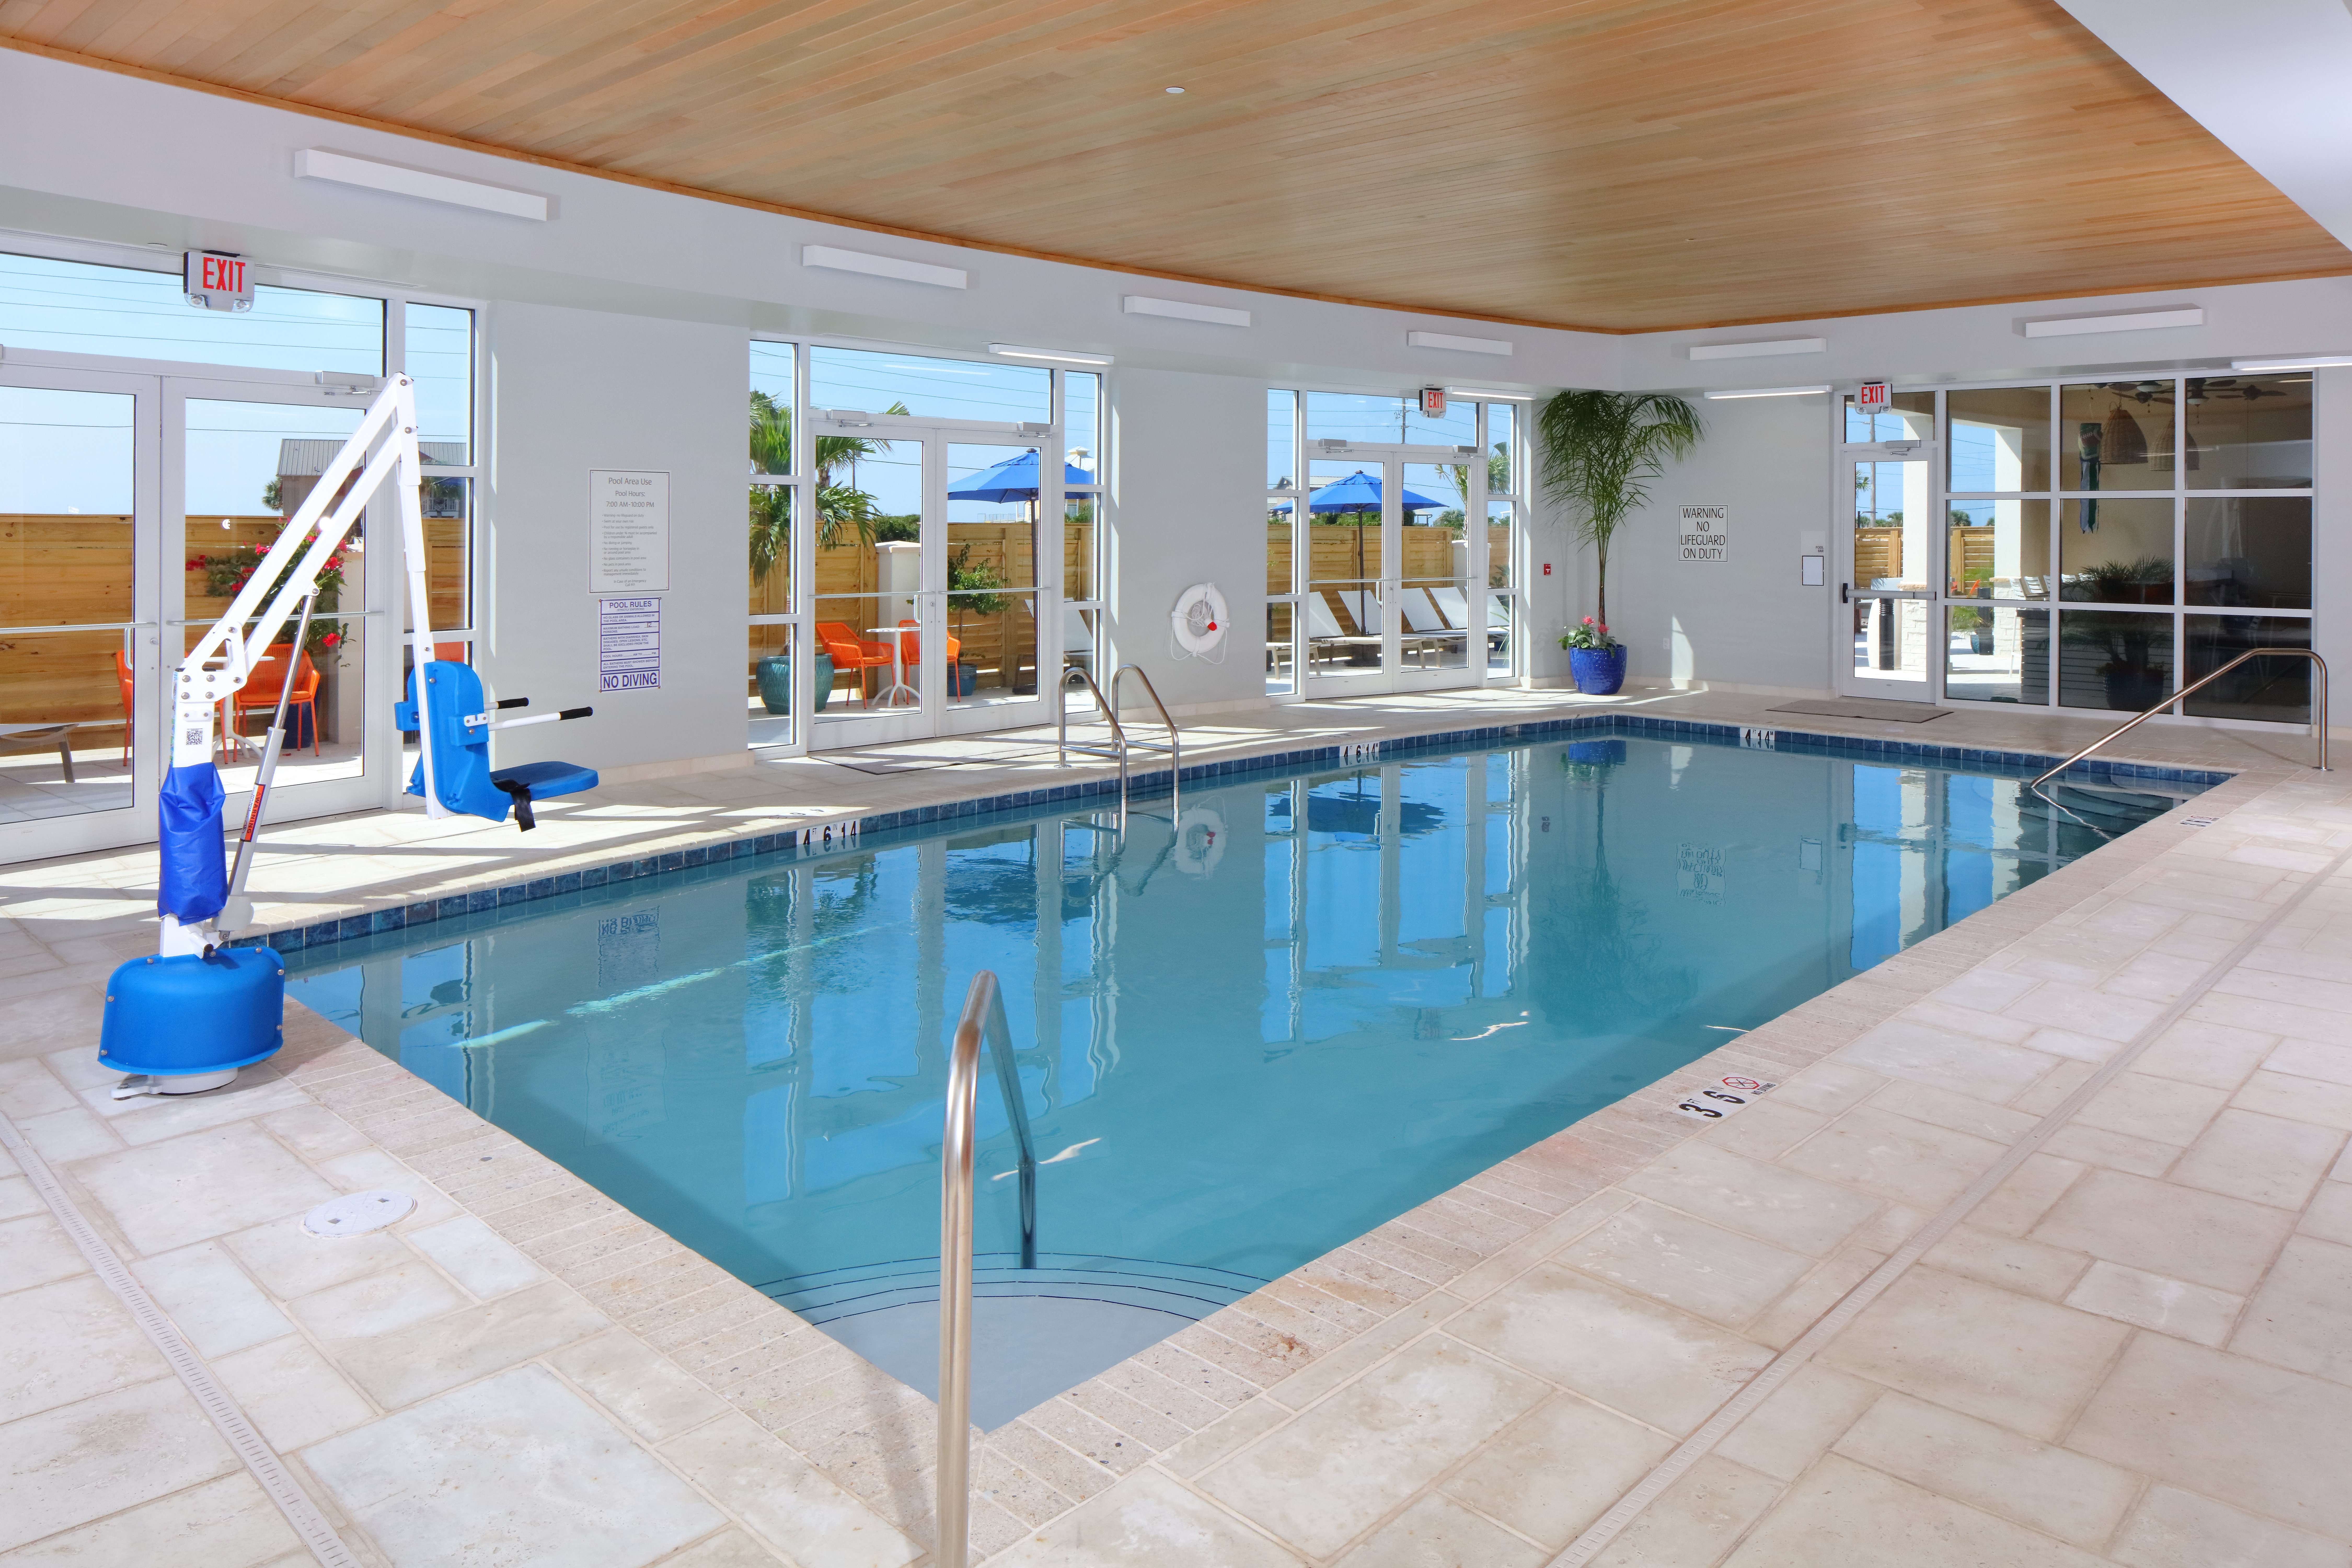 Enjoy our indoor heated pool with views of the Courtyard area